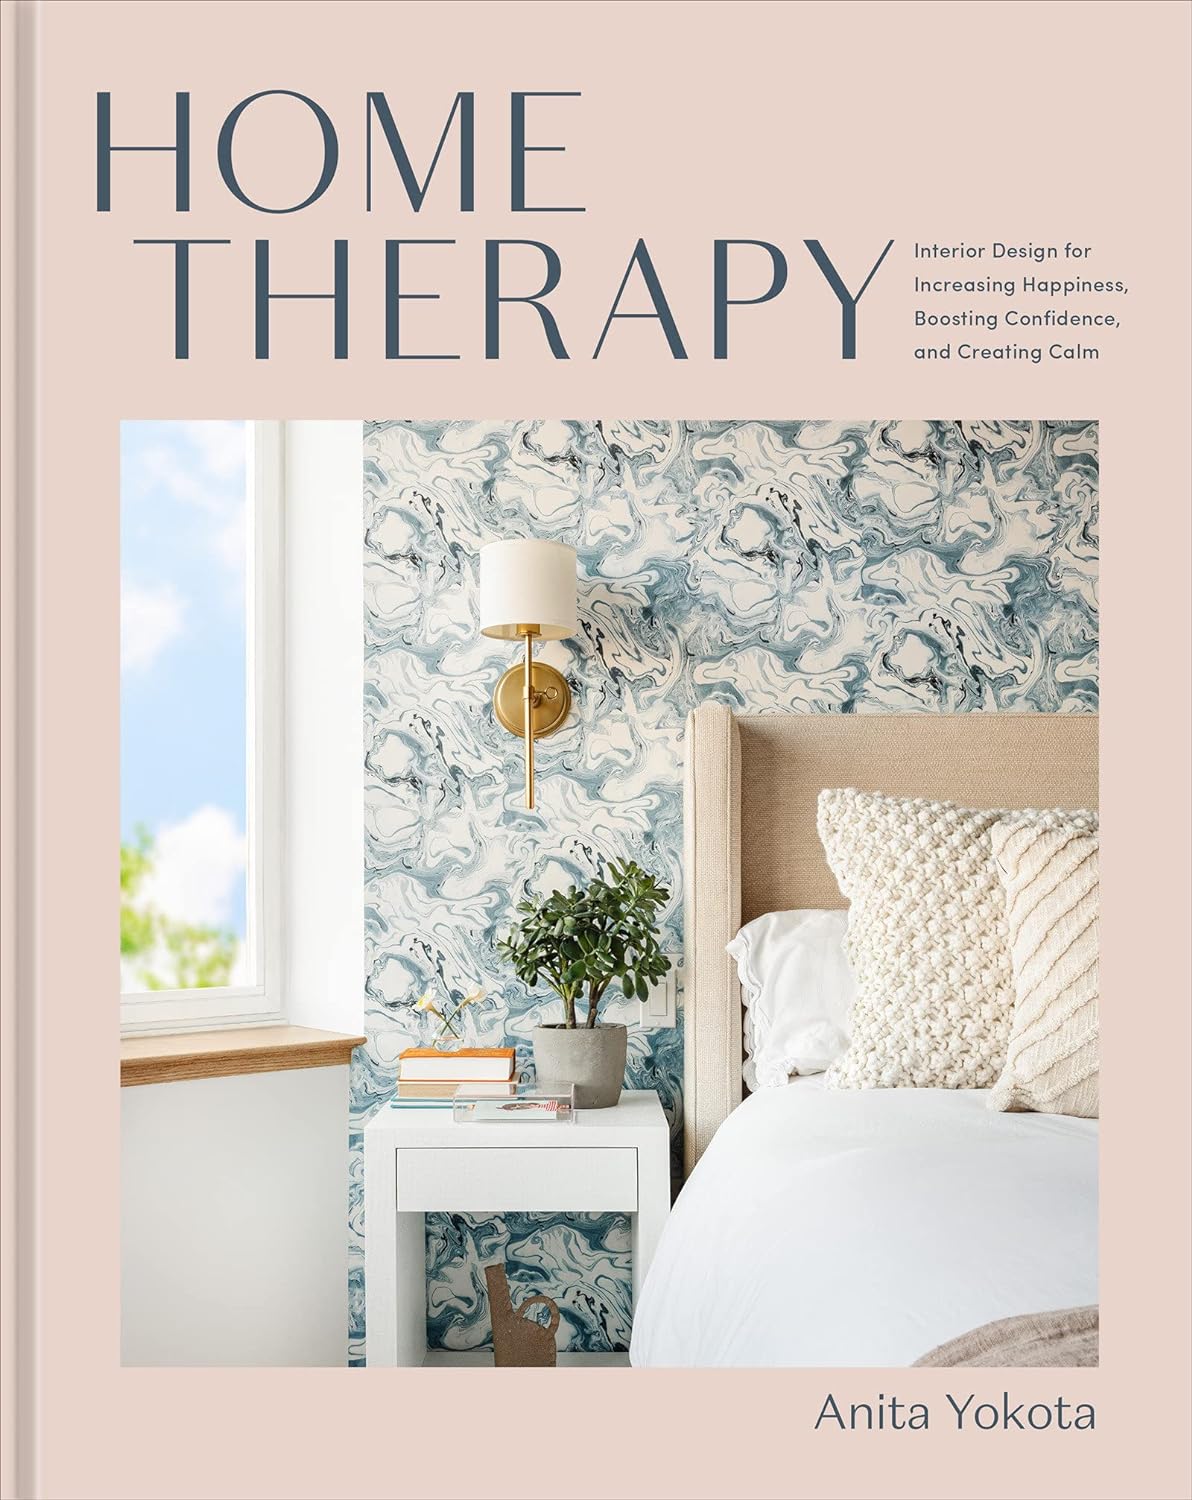 Home Therapy - Interior Design for Increasing Happiness